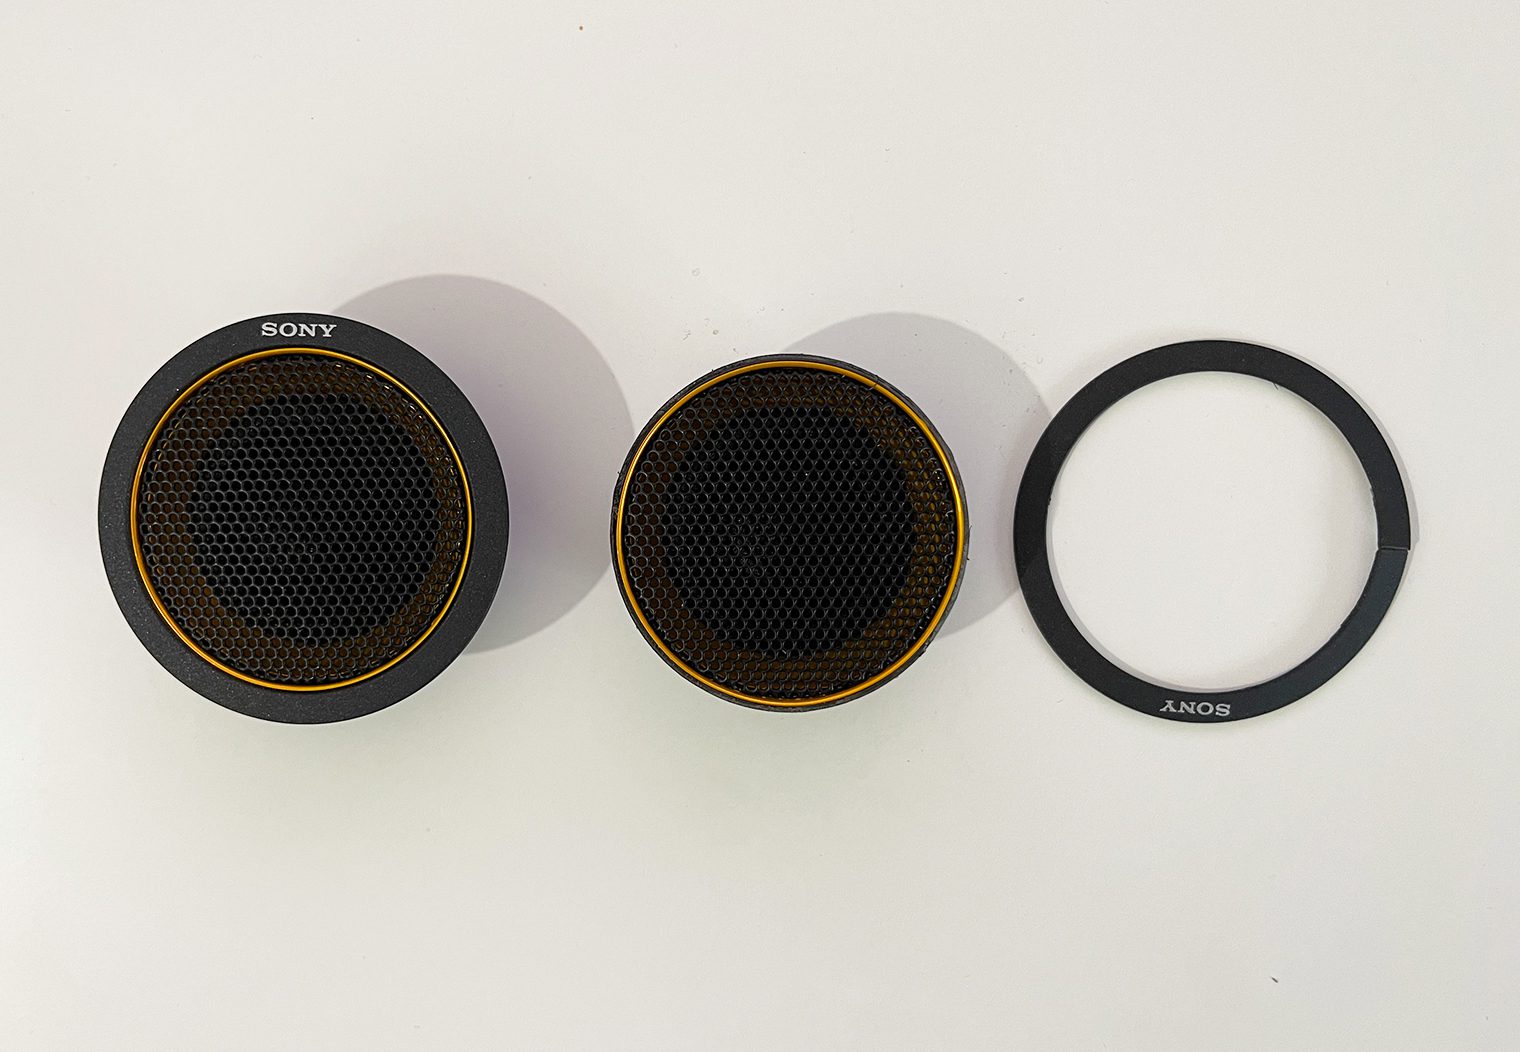 Cutting Sony Tweeter Rim Off Before After